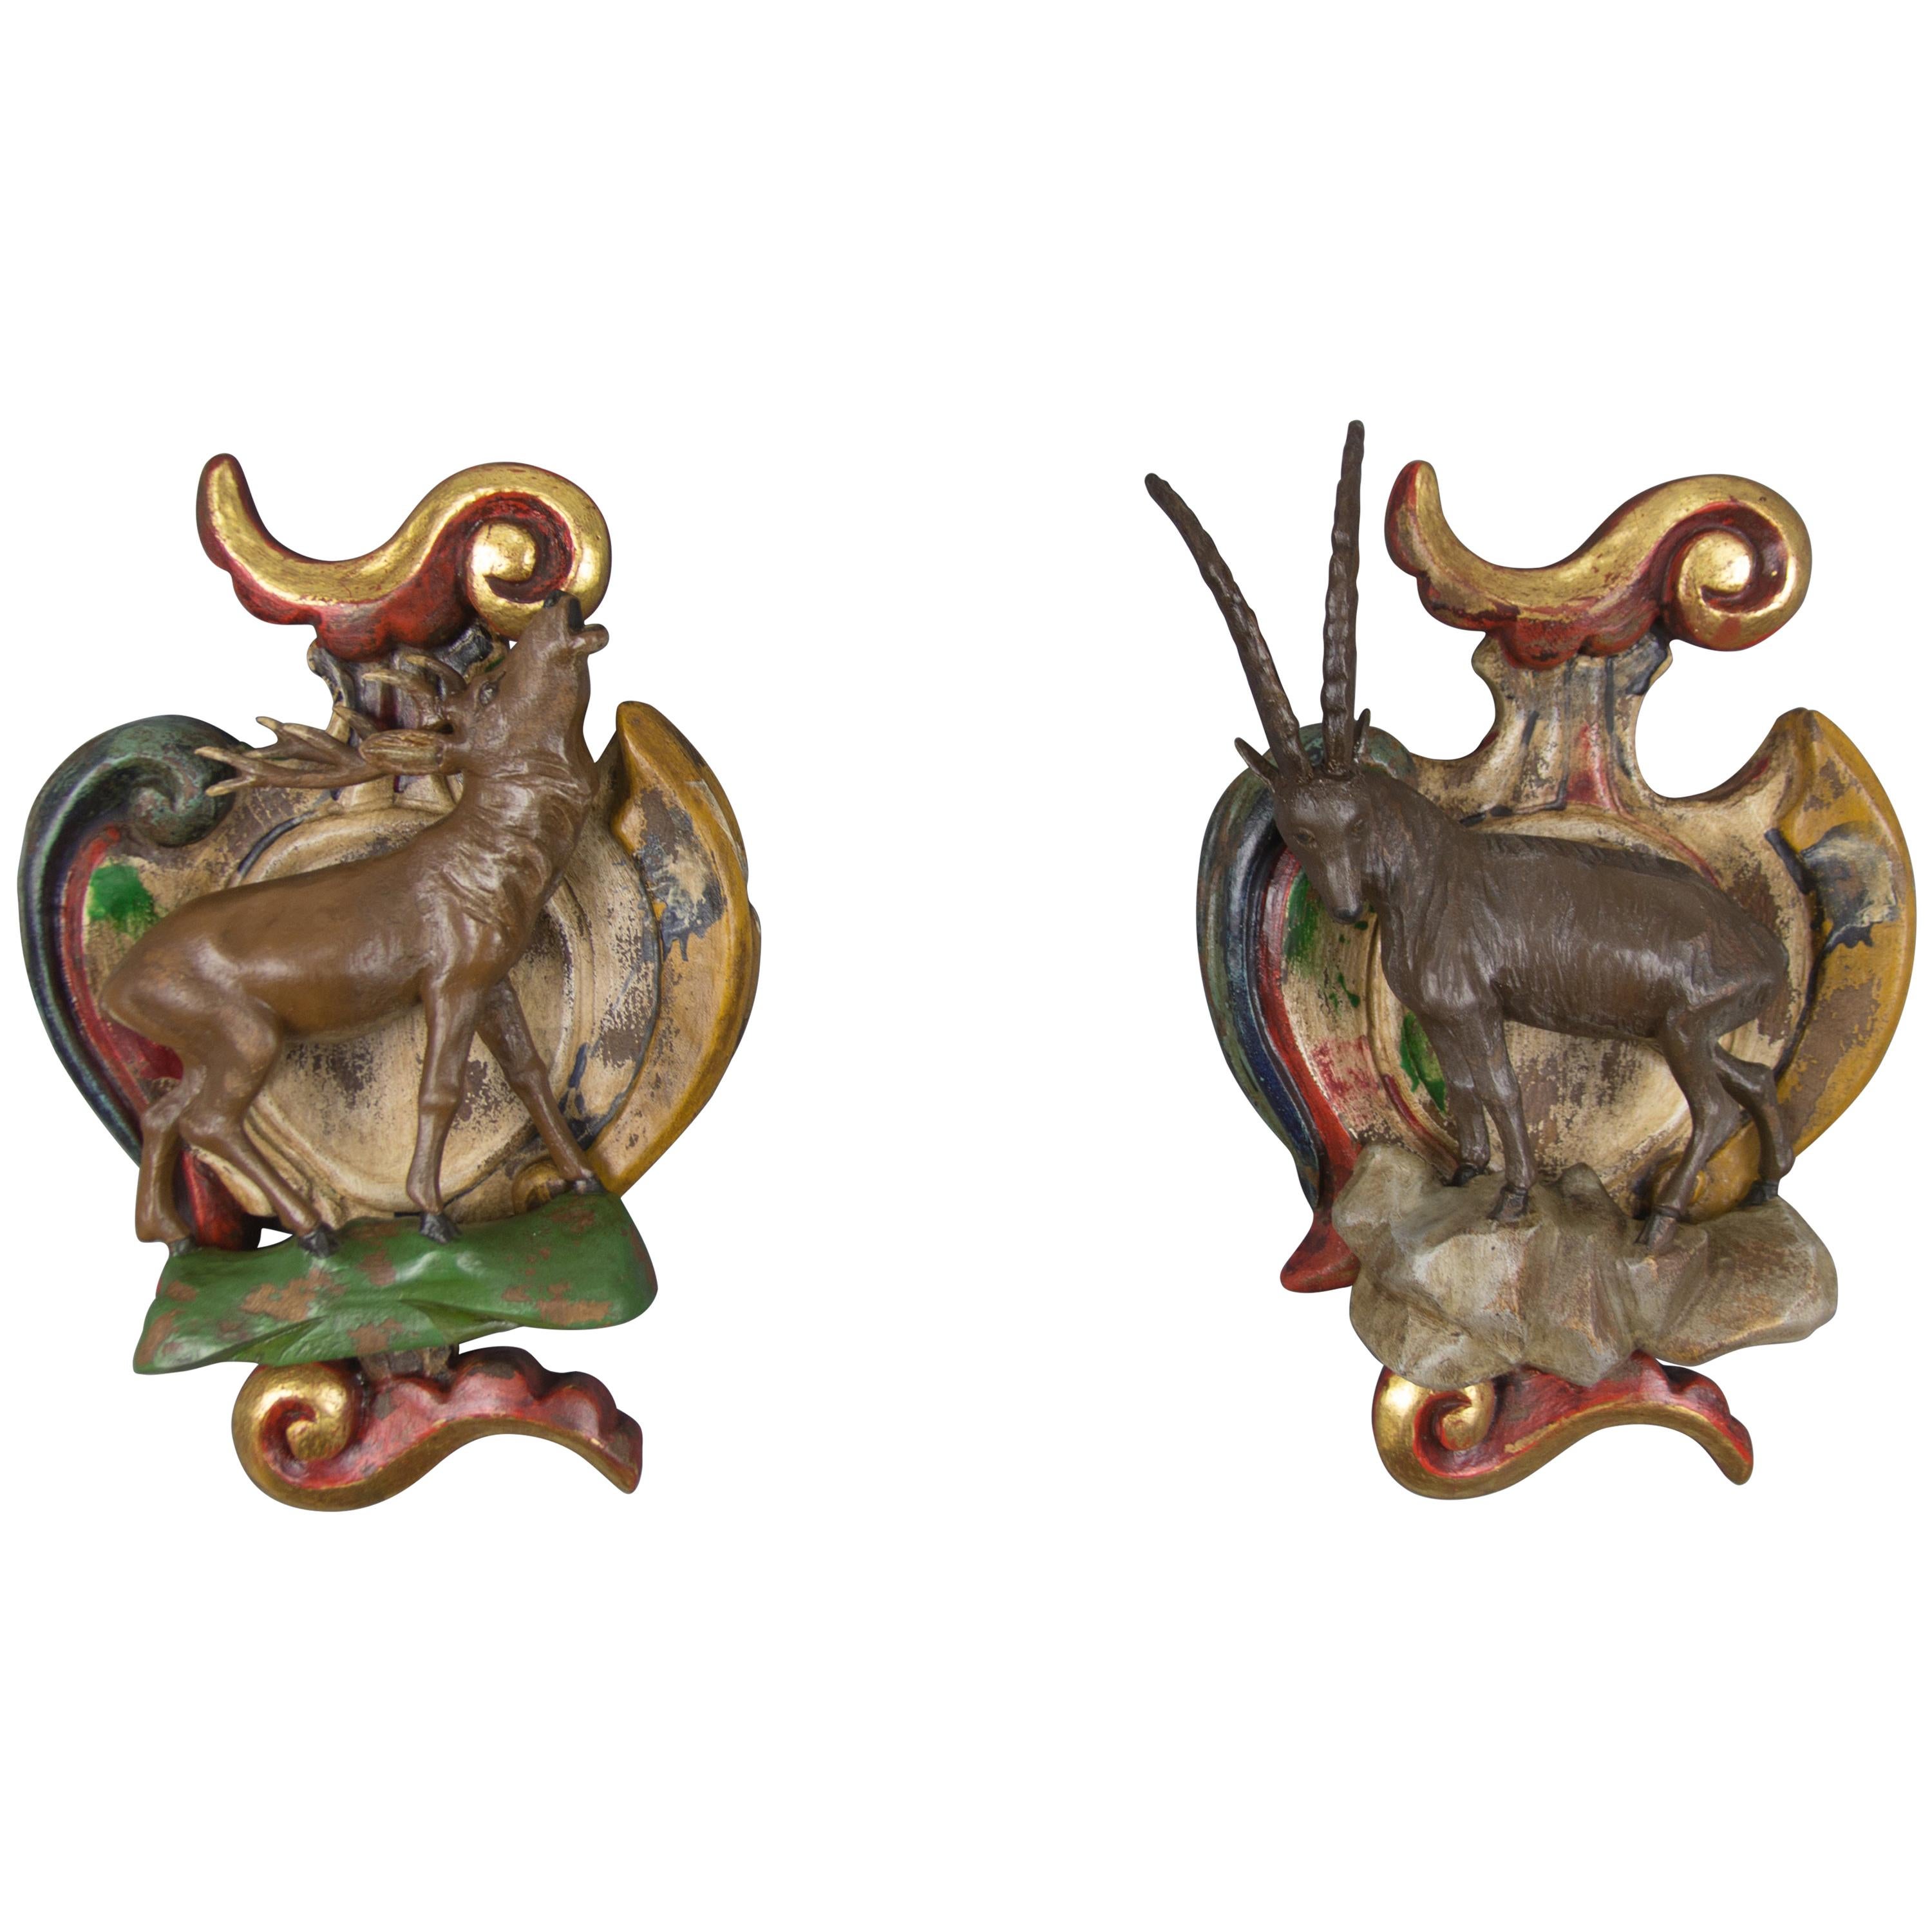 Pair of Carved Wood Baroque Style Wall Decors with Deer and Ibex Figures